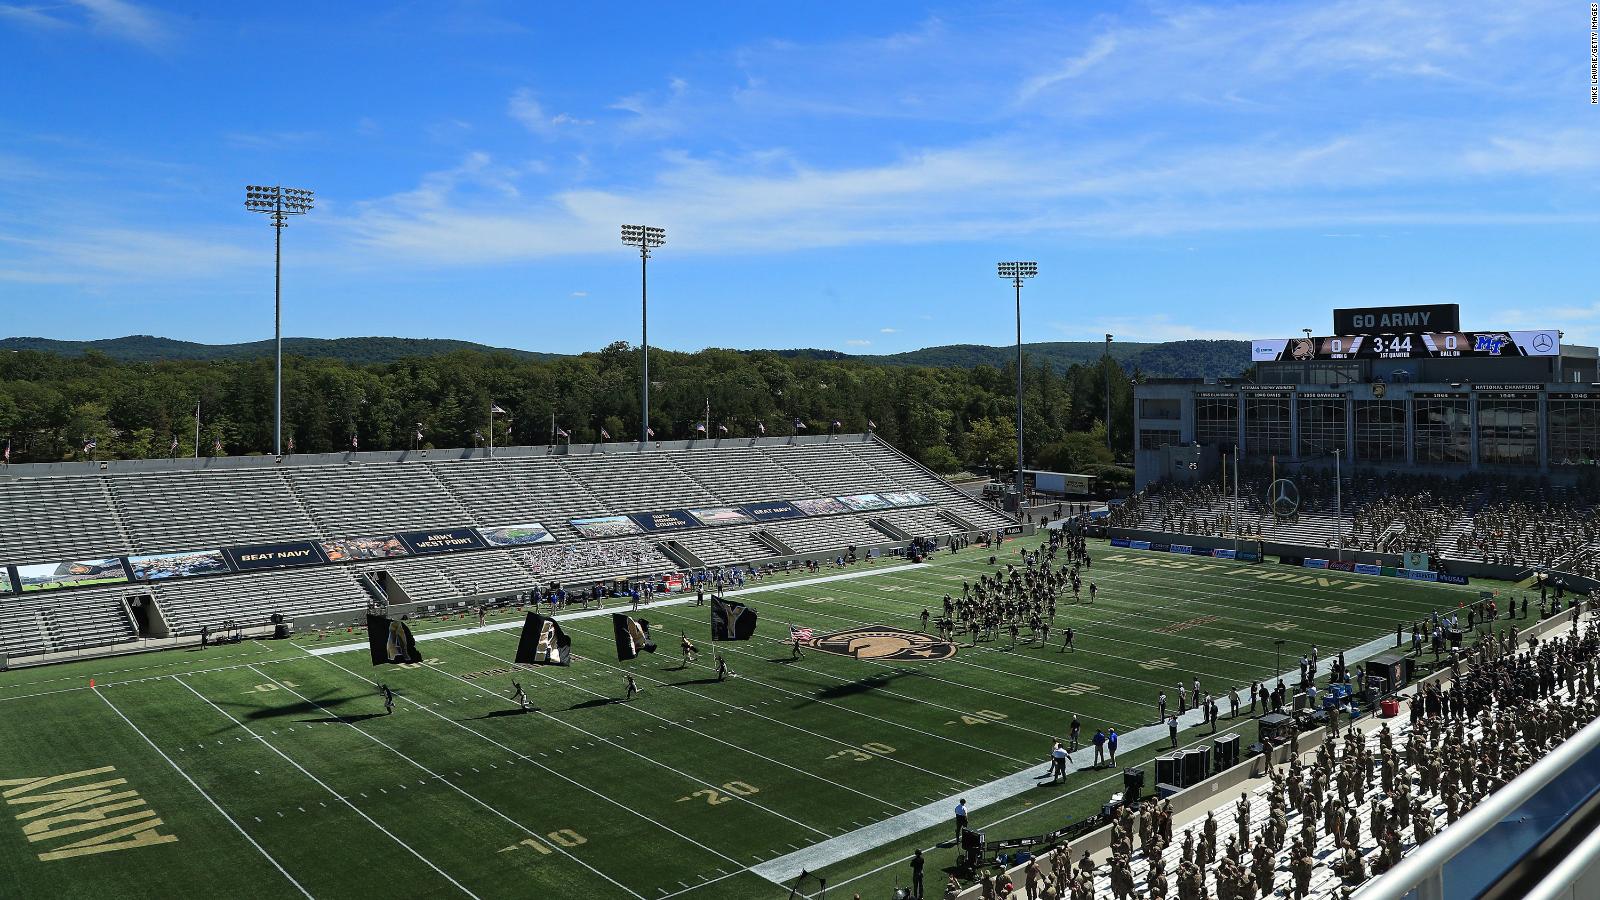 ArmyNavy football game will be played at West Point for first time since 1943 CNN